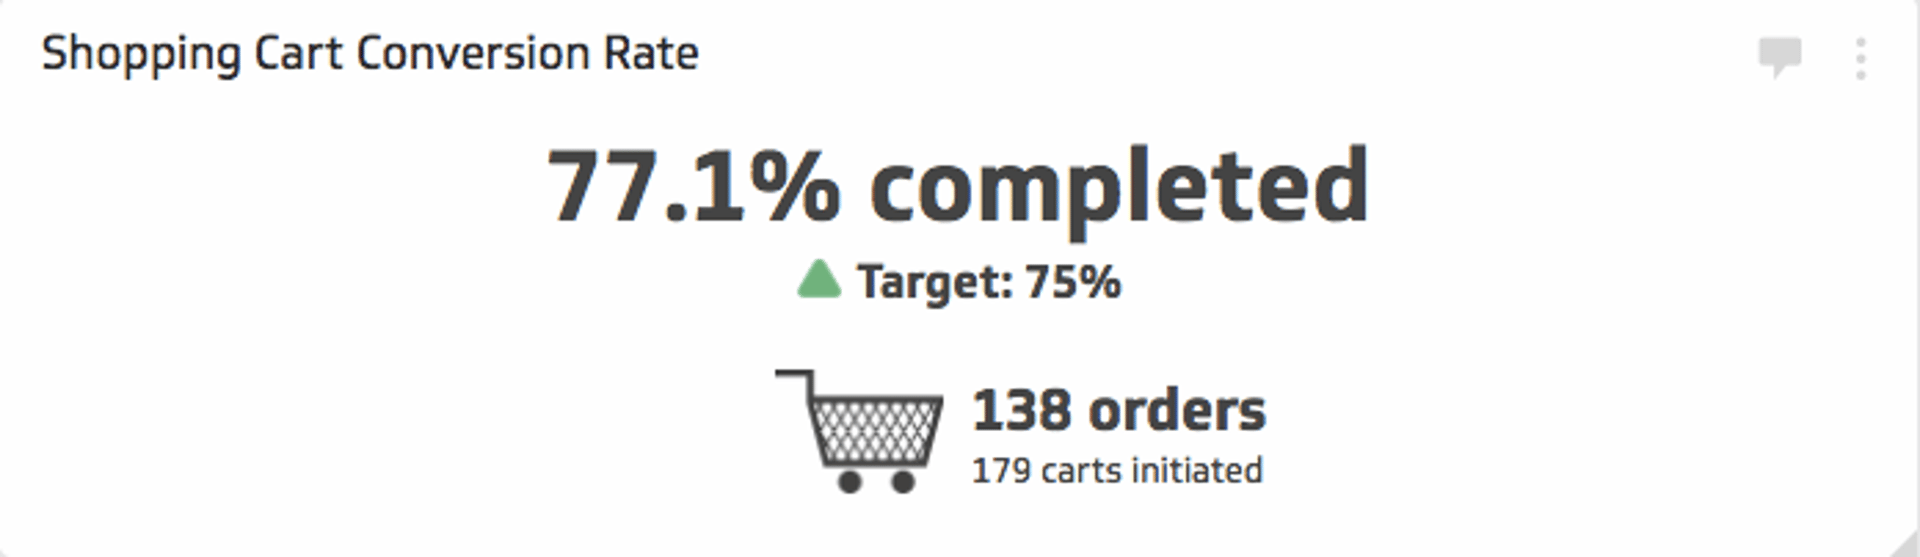 Ecommerce KPI Examples - Shopping Cart Conversion Rate Metric